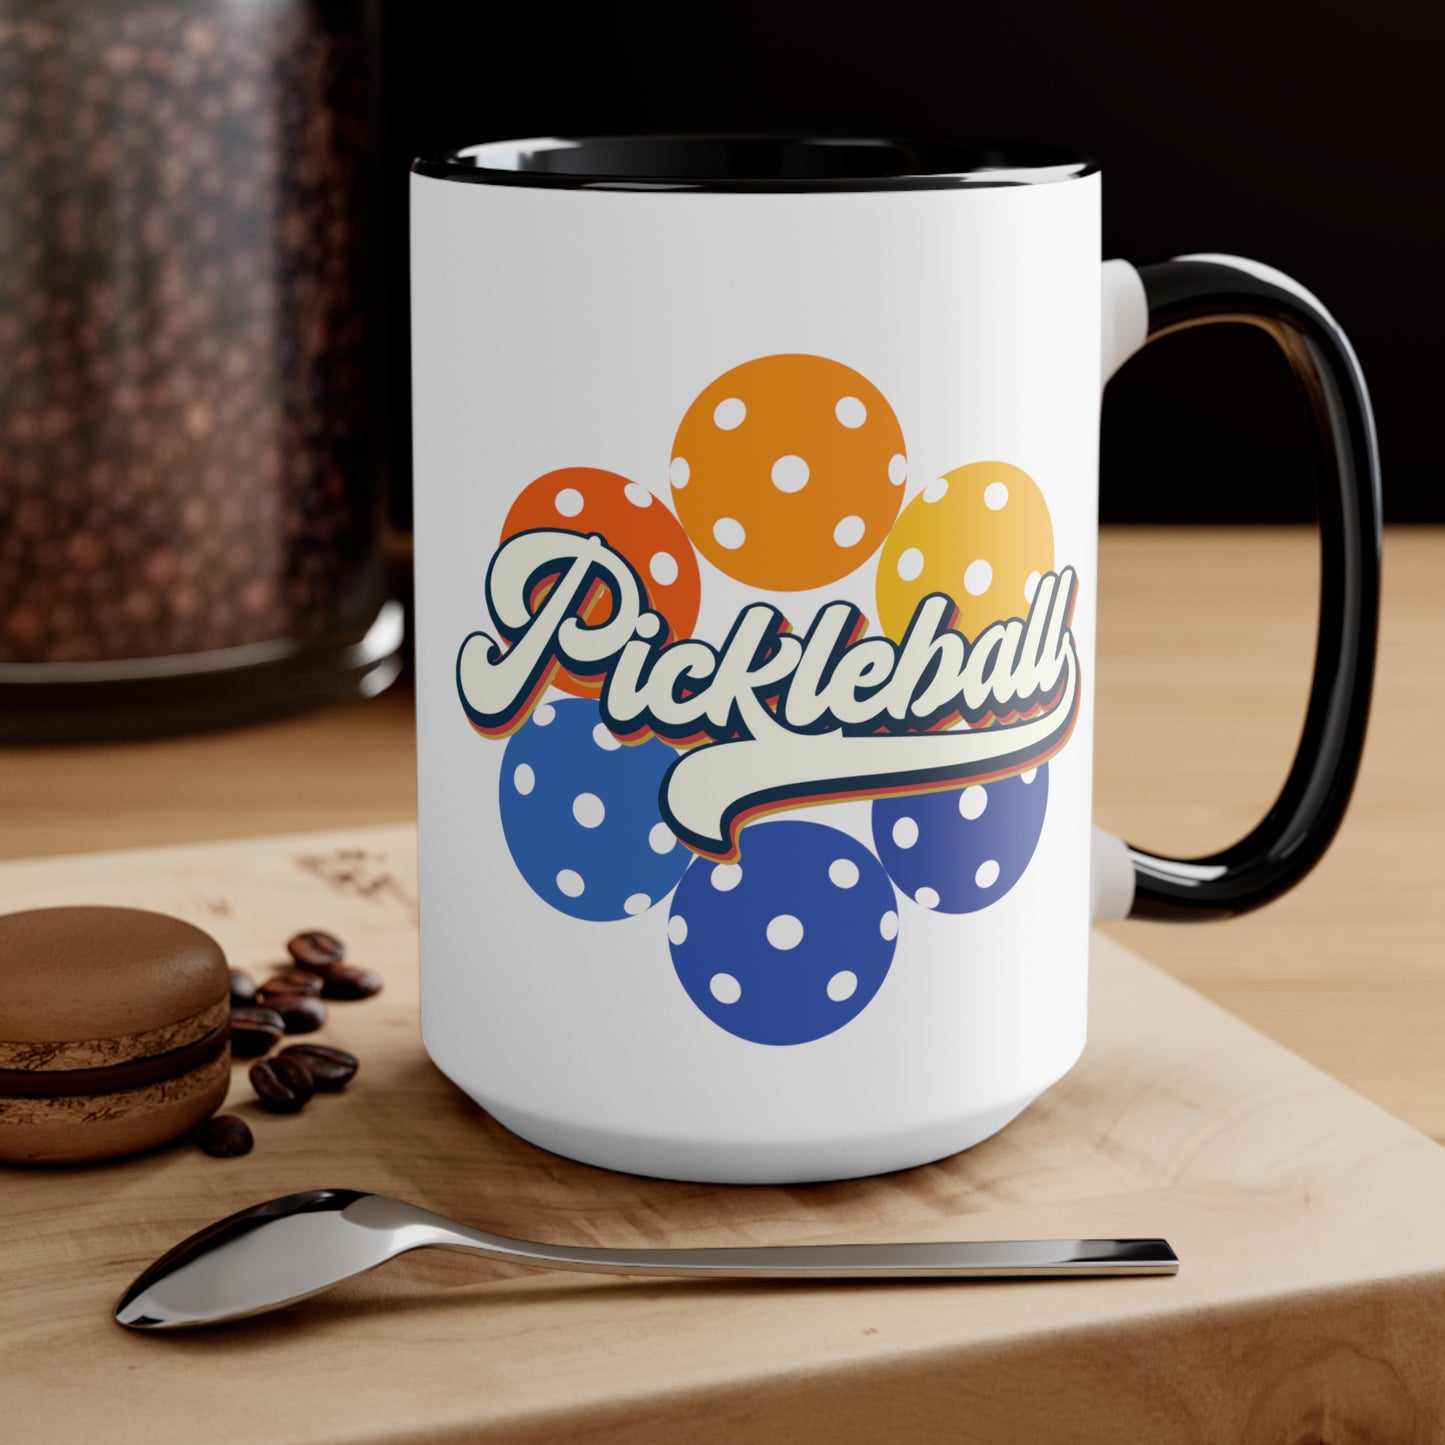 Colorful Pickleball Mug, Pickleball Mug, Pickleball Drink Cup, Gifts For Pickleball Lovers, Pickleball, Gift Ideas, Coffee Cup, Sports Mug